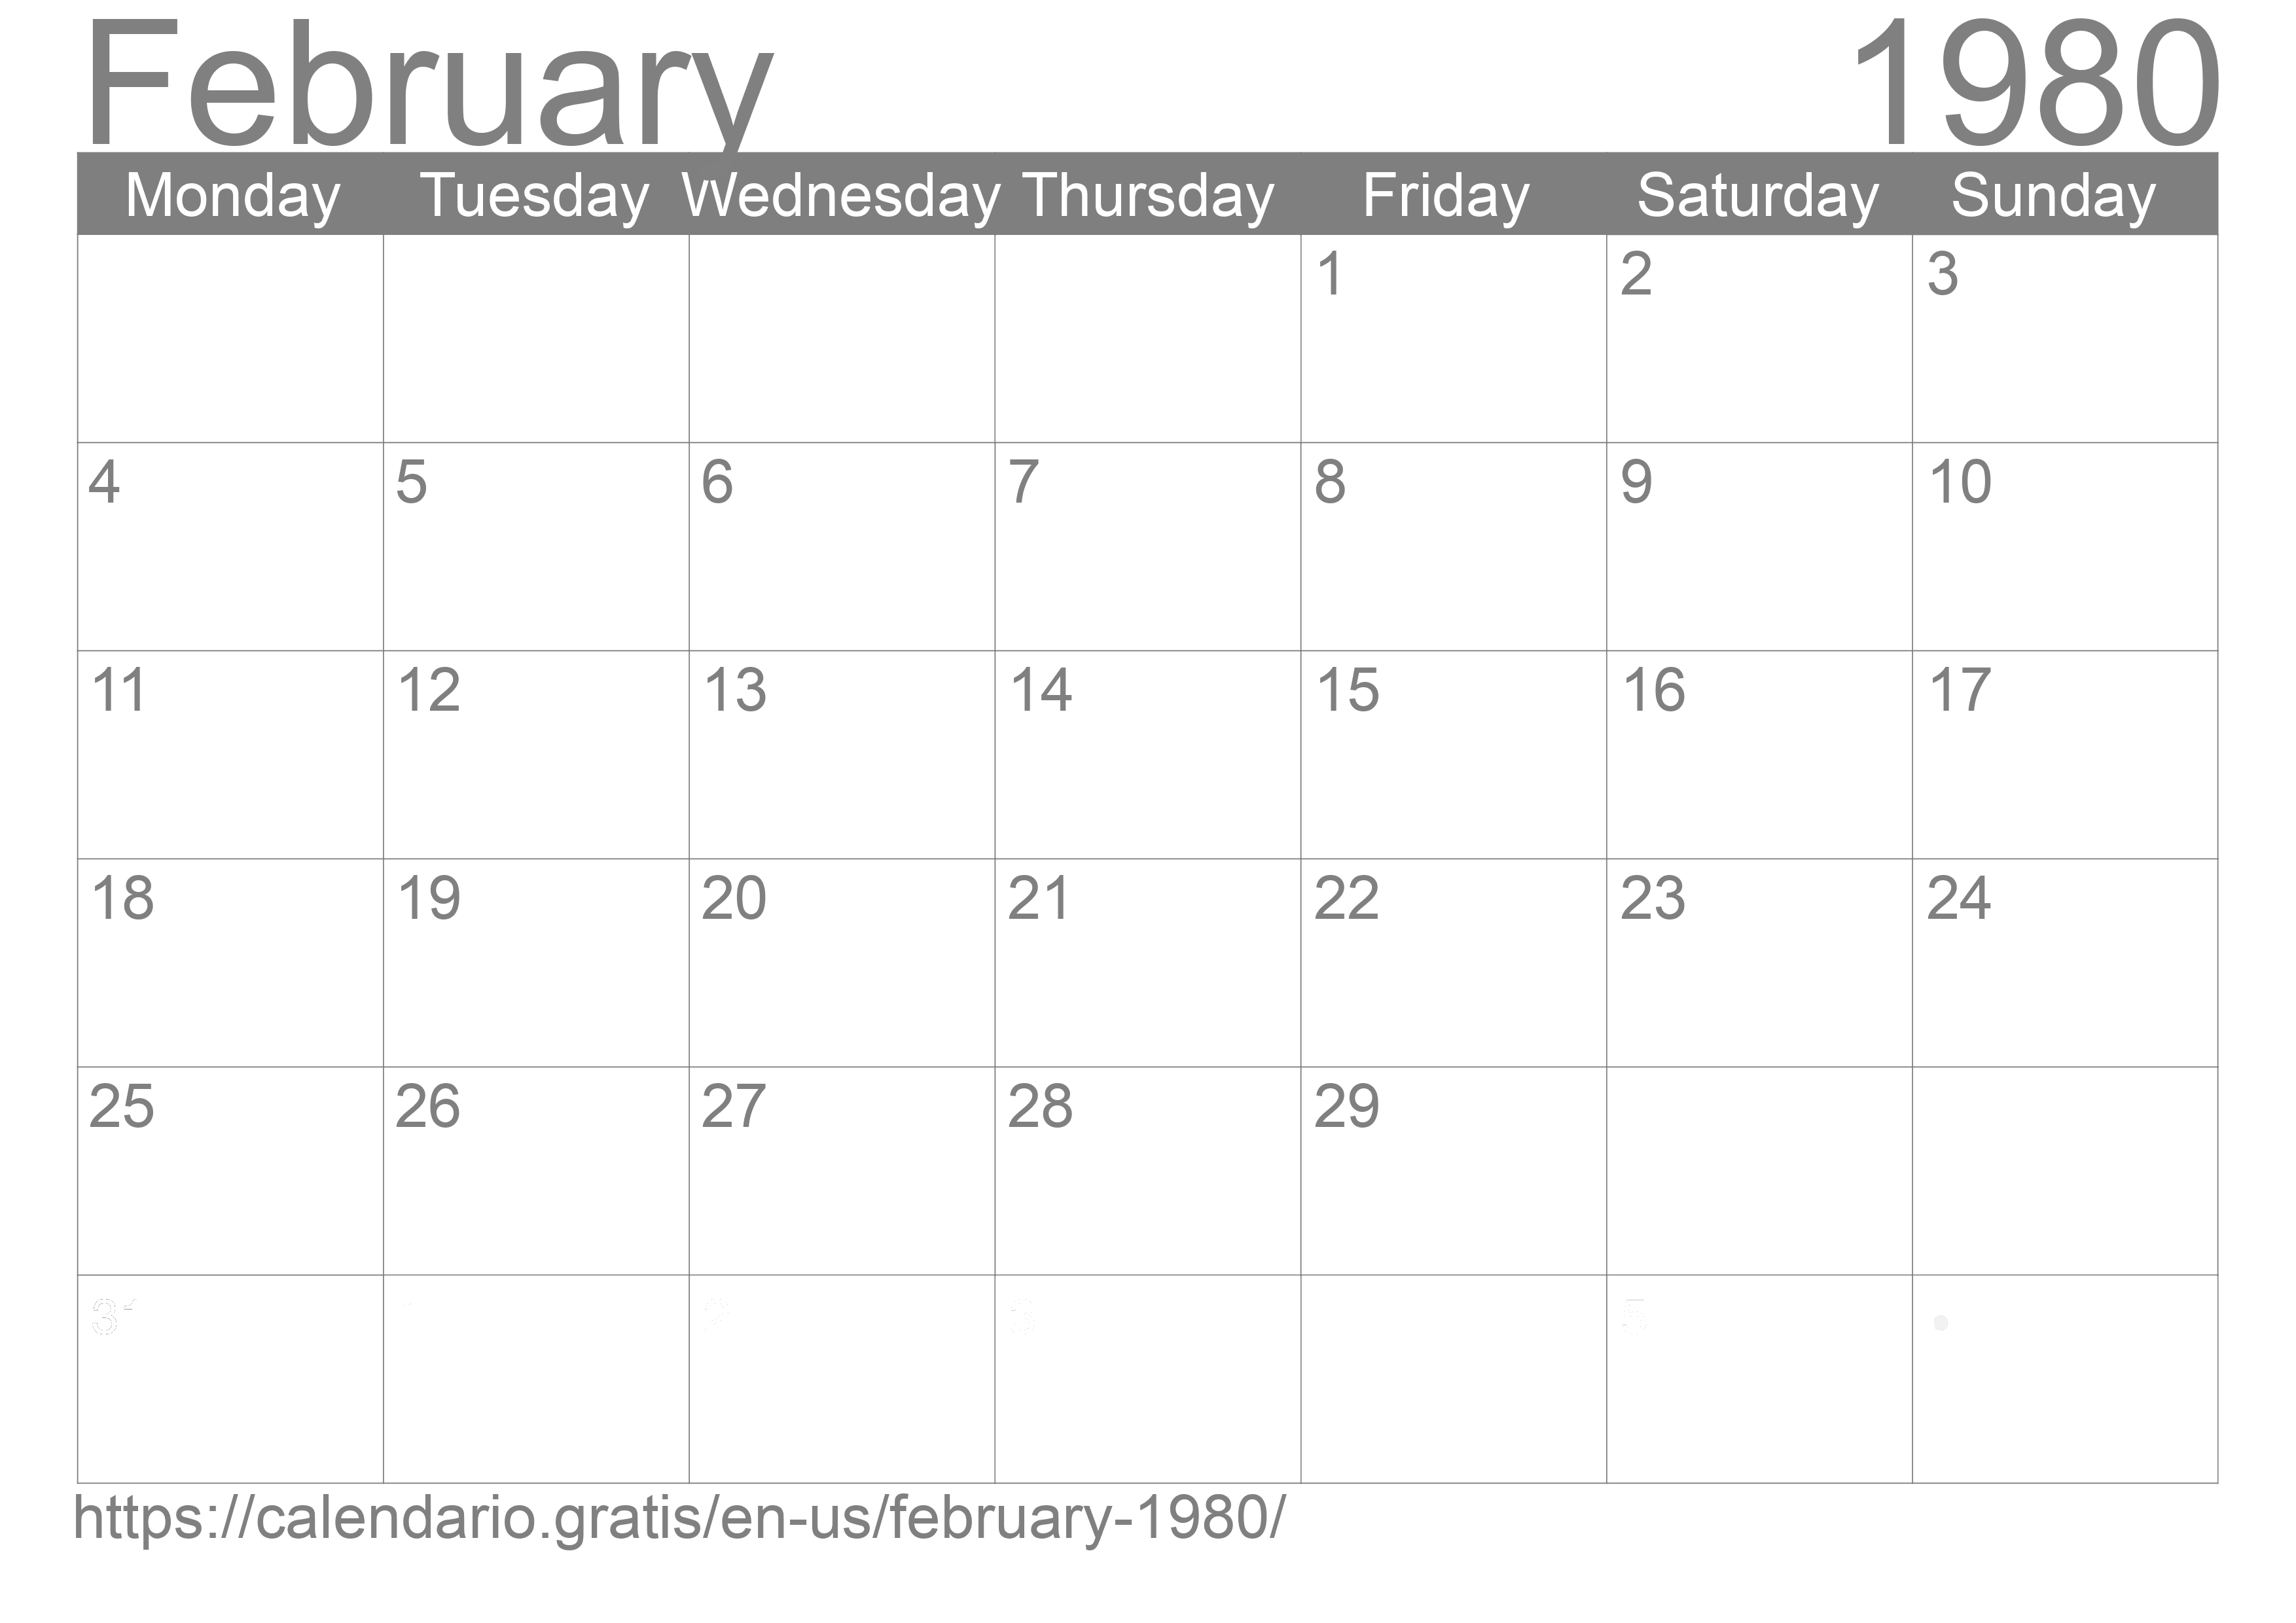 Calendar February 1980 from United States of America in English ☑️